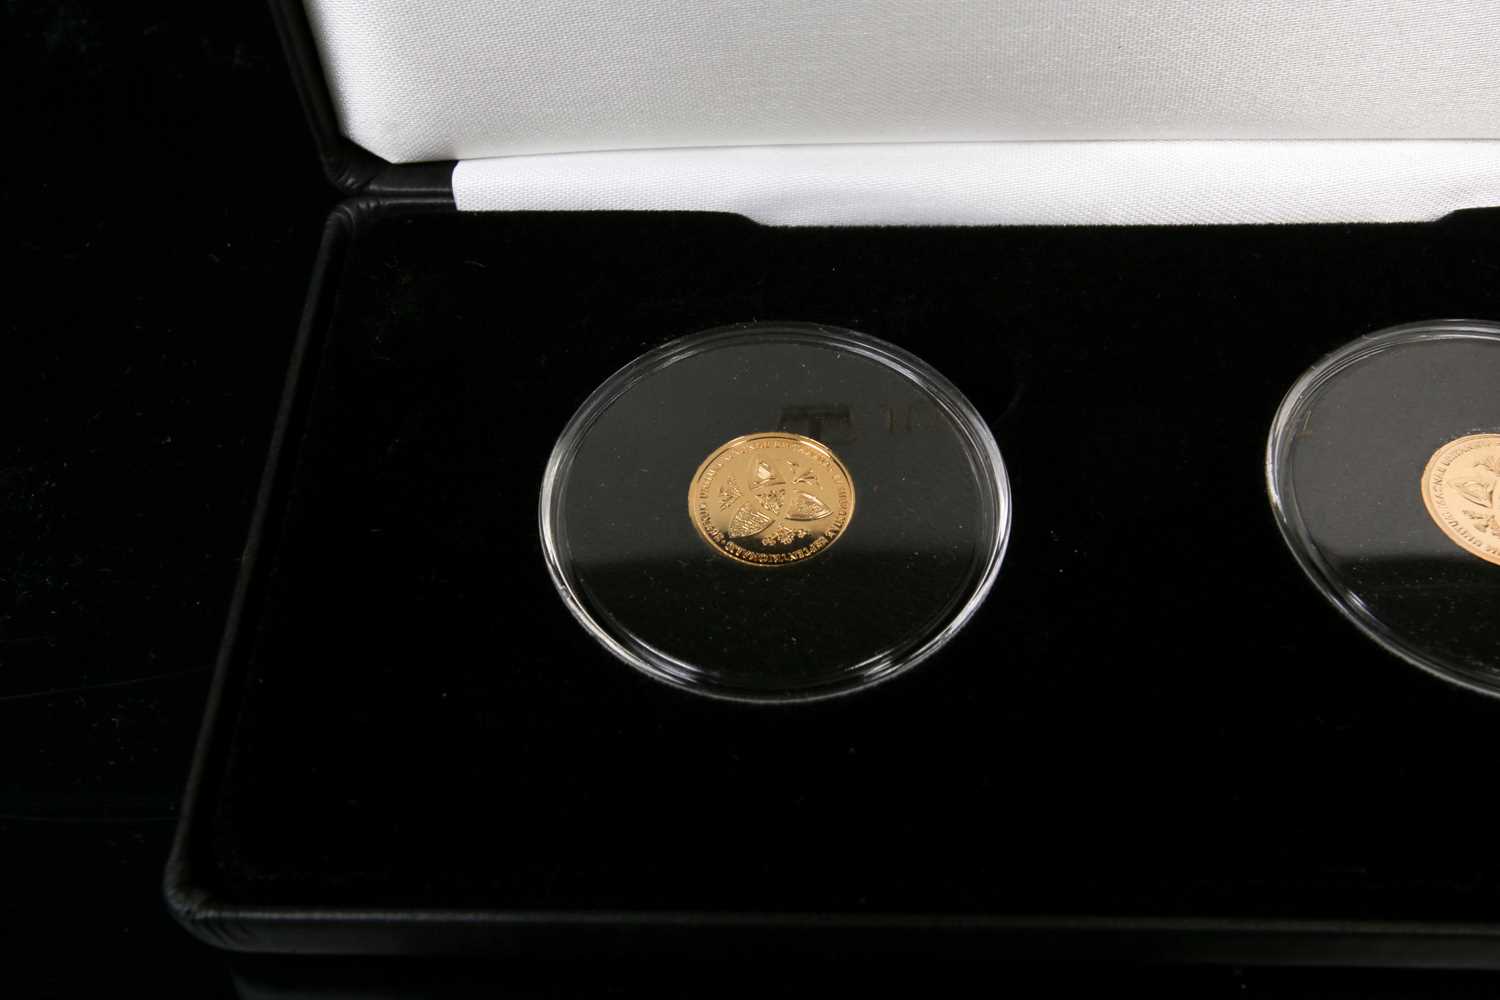 The Prince George & Princess Charlotte of Cambridge 9ct gold commemorative medallions, proof like - Image 4 of 5